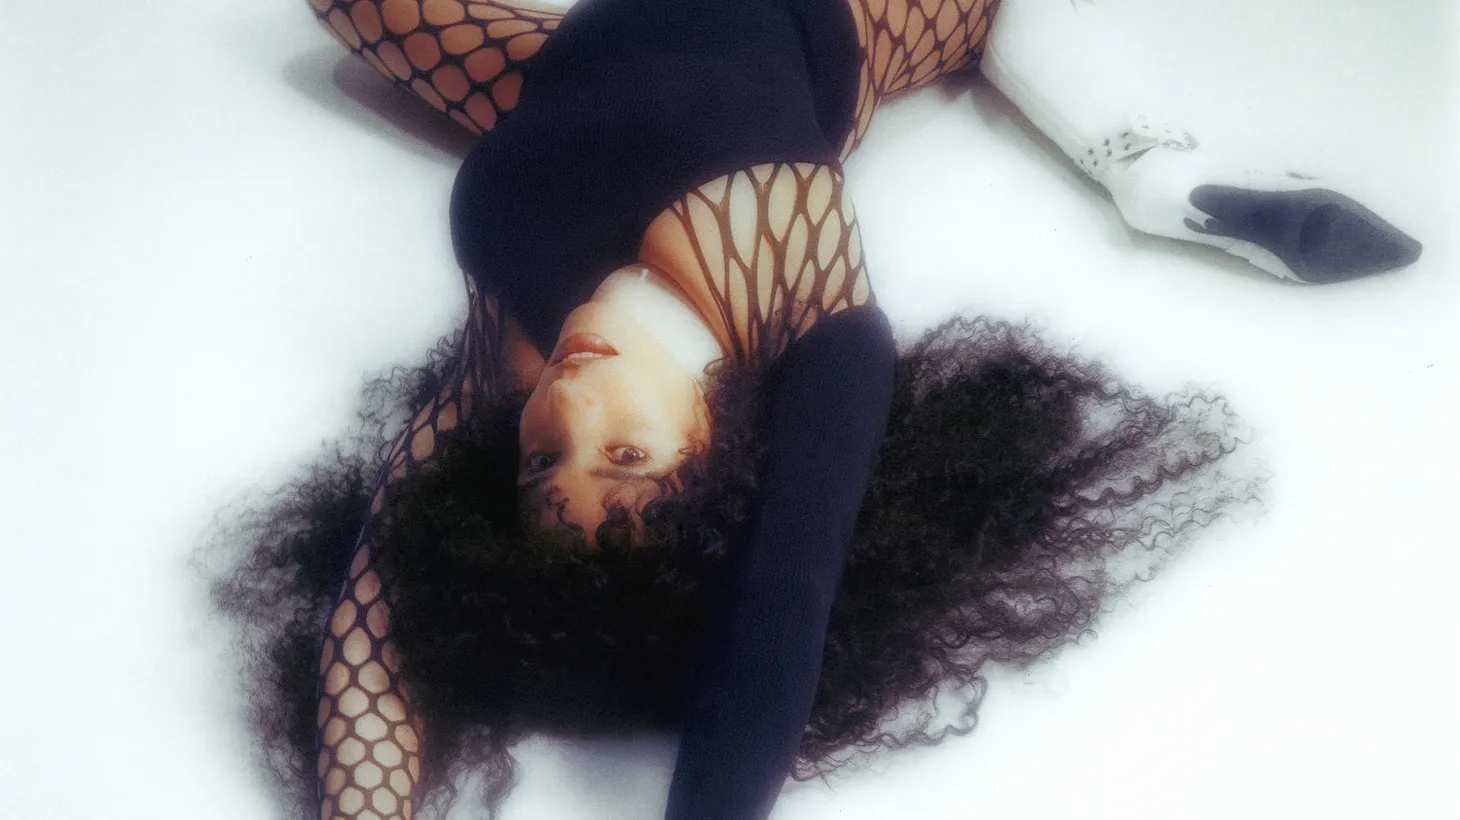 Dubbed as the “Diva of the People,” Gavin Turek has been feeling good and thinking it’s time to dust off her “Disco Boots,” stepping out into her signature dance-funk sound with a lot of, ahem, soul (sole?).